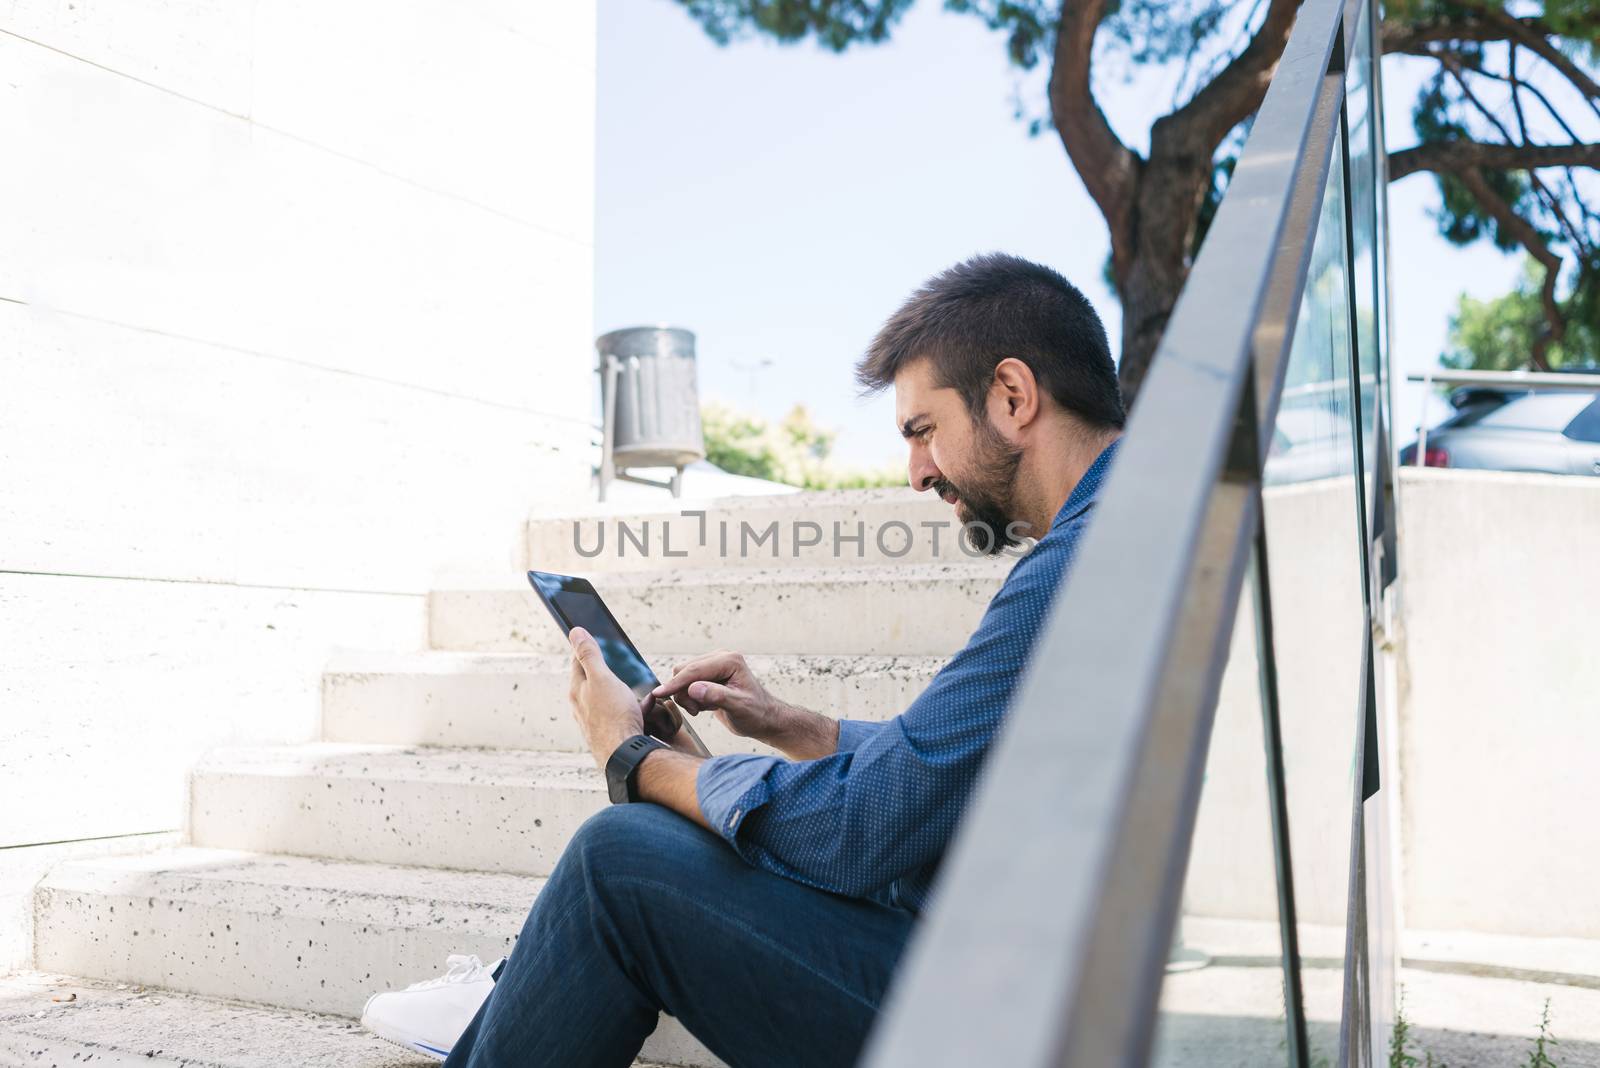 Bearded man sitting on steps while using a tablet by raferto1973